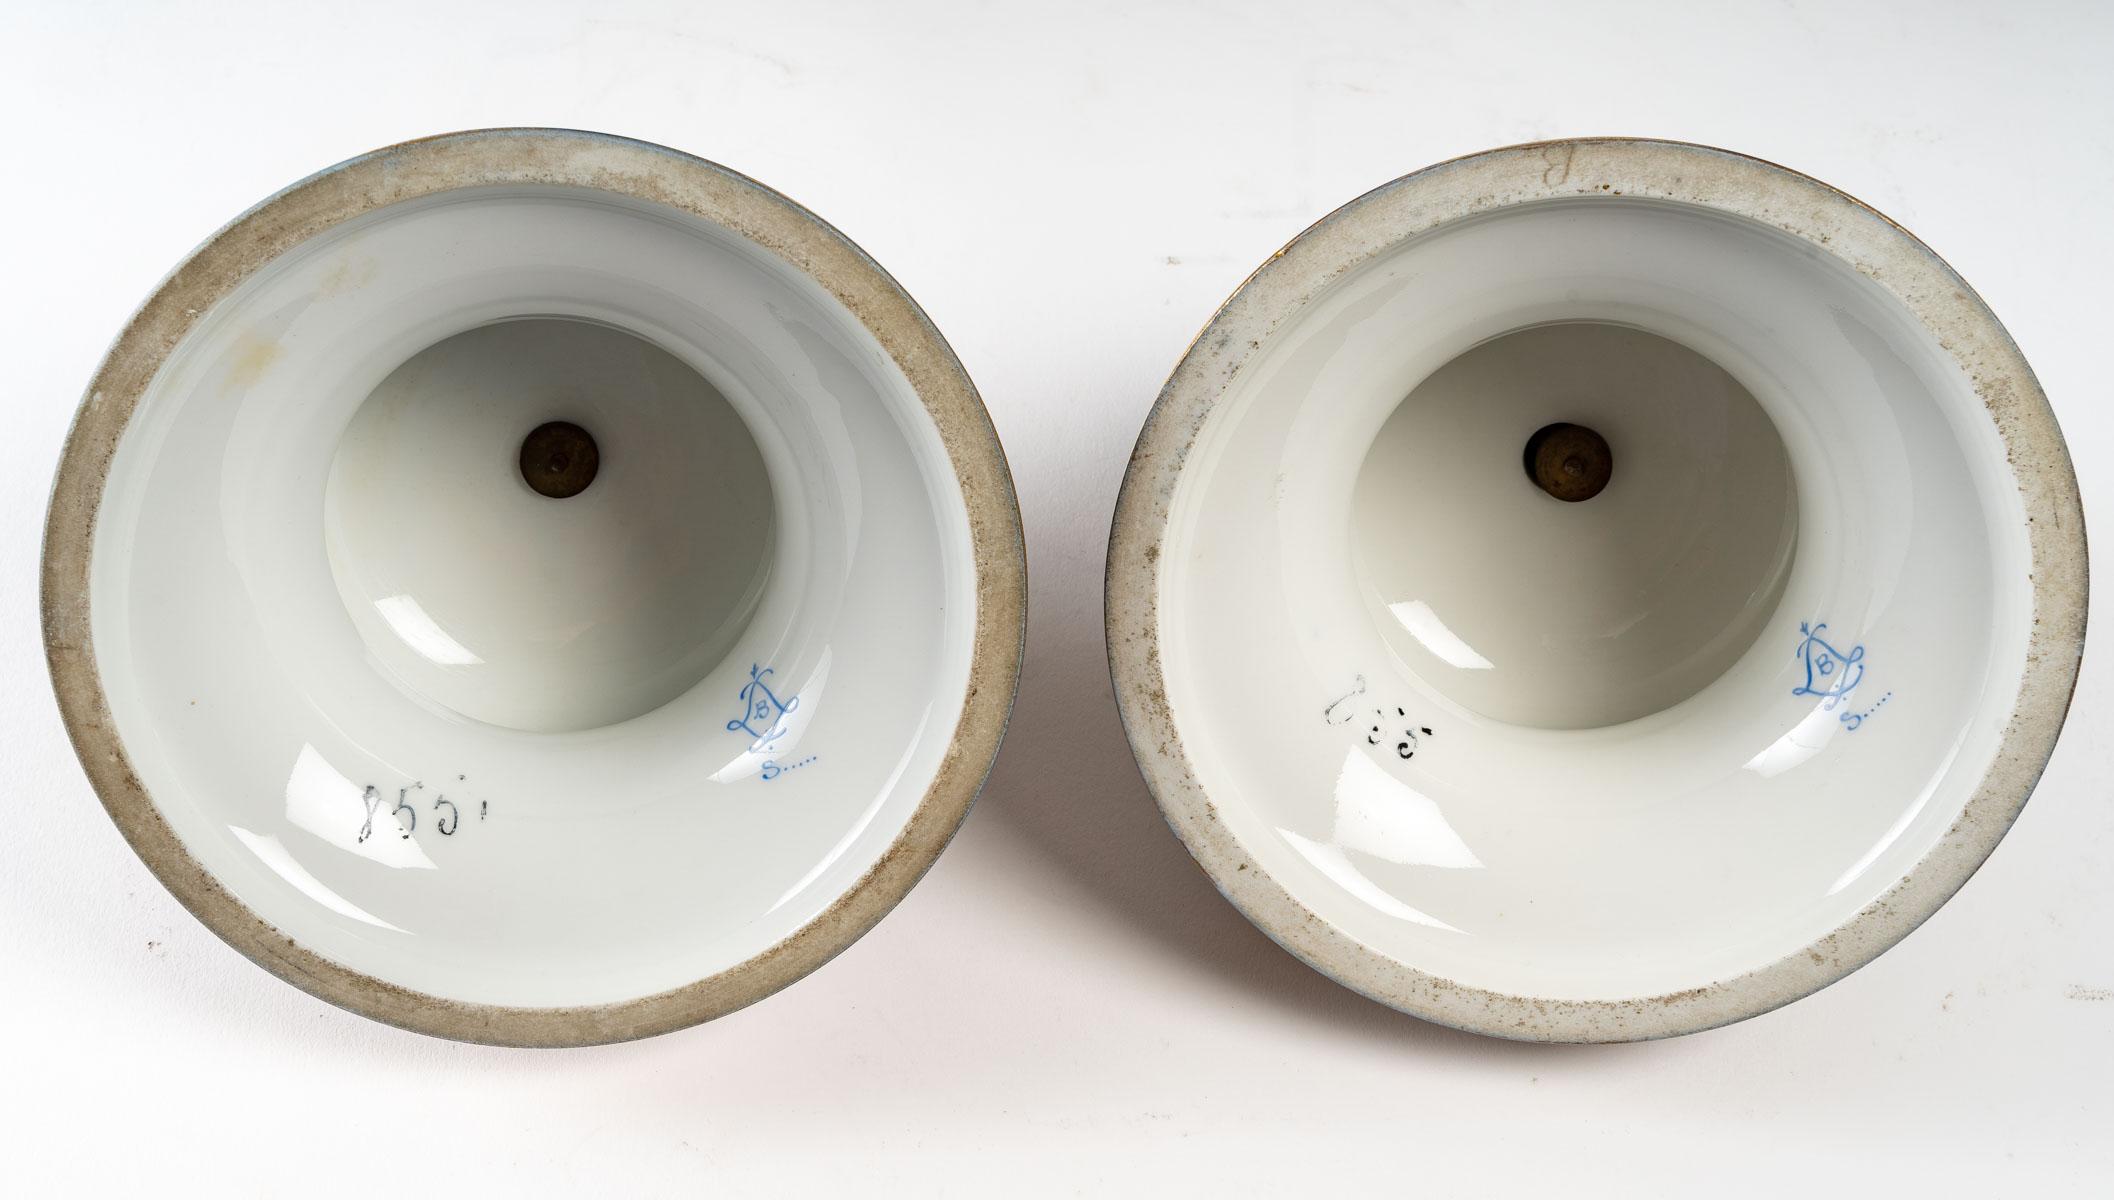 A pair of Sèvres porcelain covered vases, signed J. Lascot, late 19th century, Napoleon III period.
Measures: H: 53 cm, D: 18 cm.